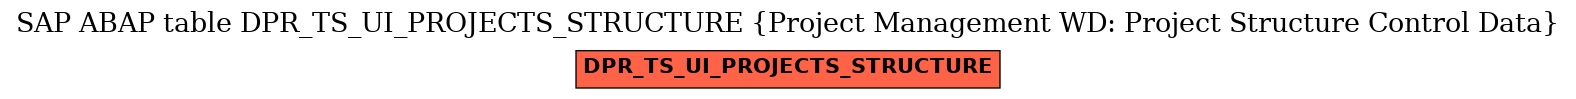 E-R Diagram for table DPR_TS_UI_PROJECTS_STRUCTURE (Project Management WD: Project Structure Control Data)